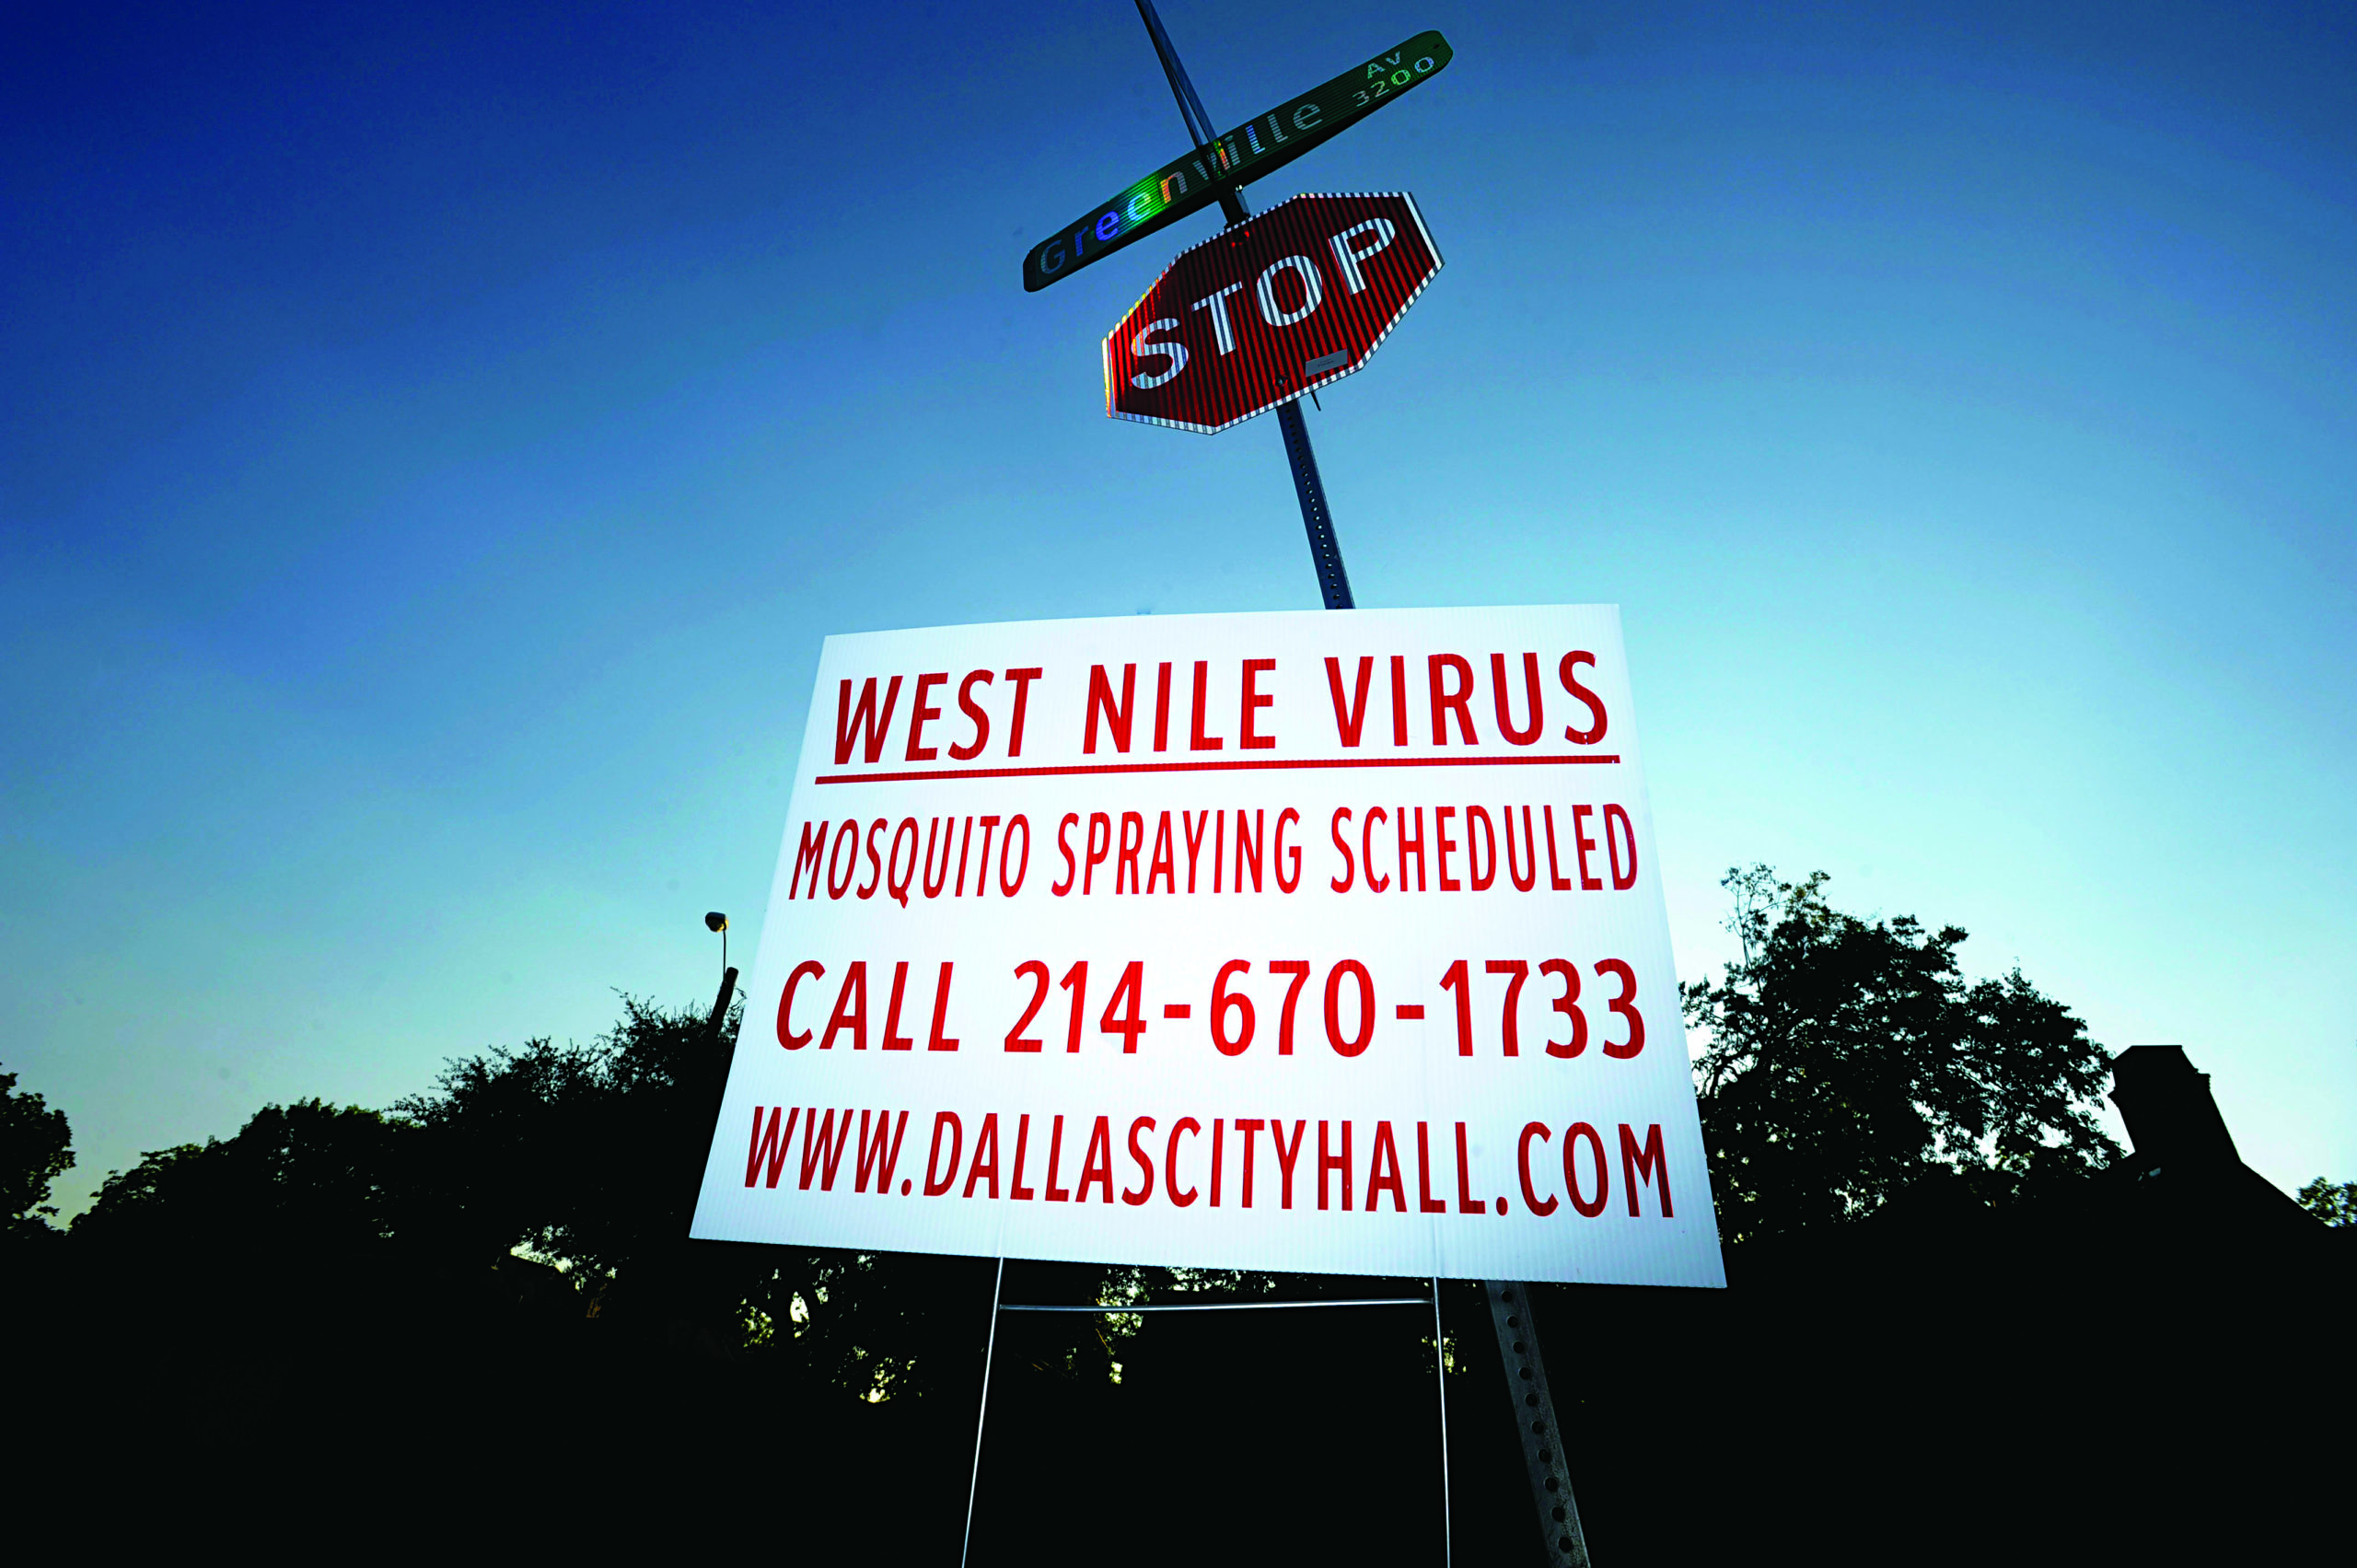 west nile sigh with phone number and website